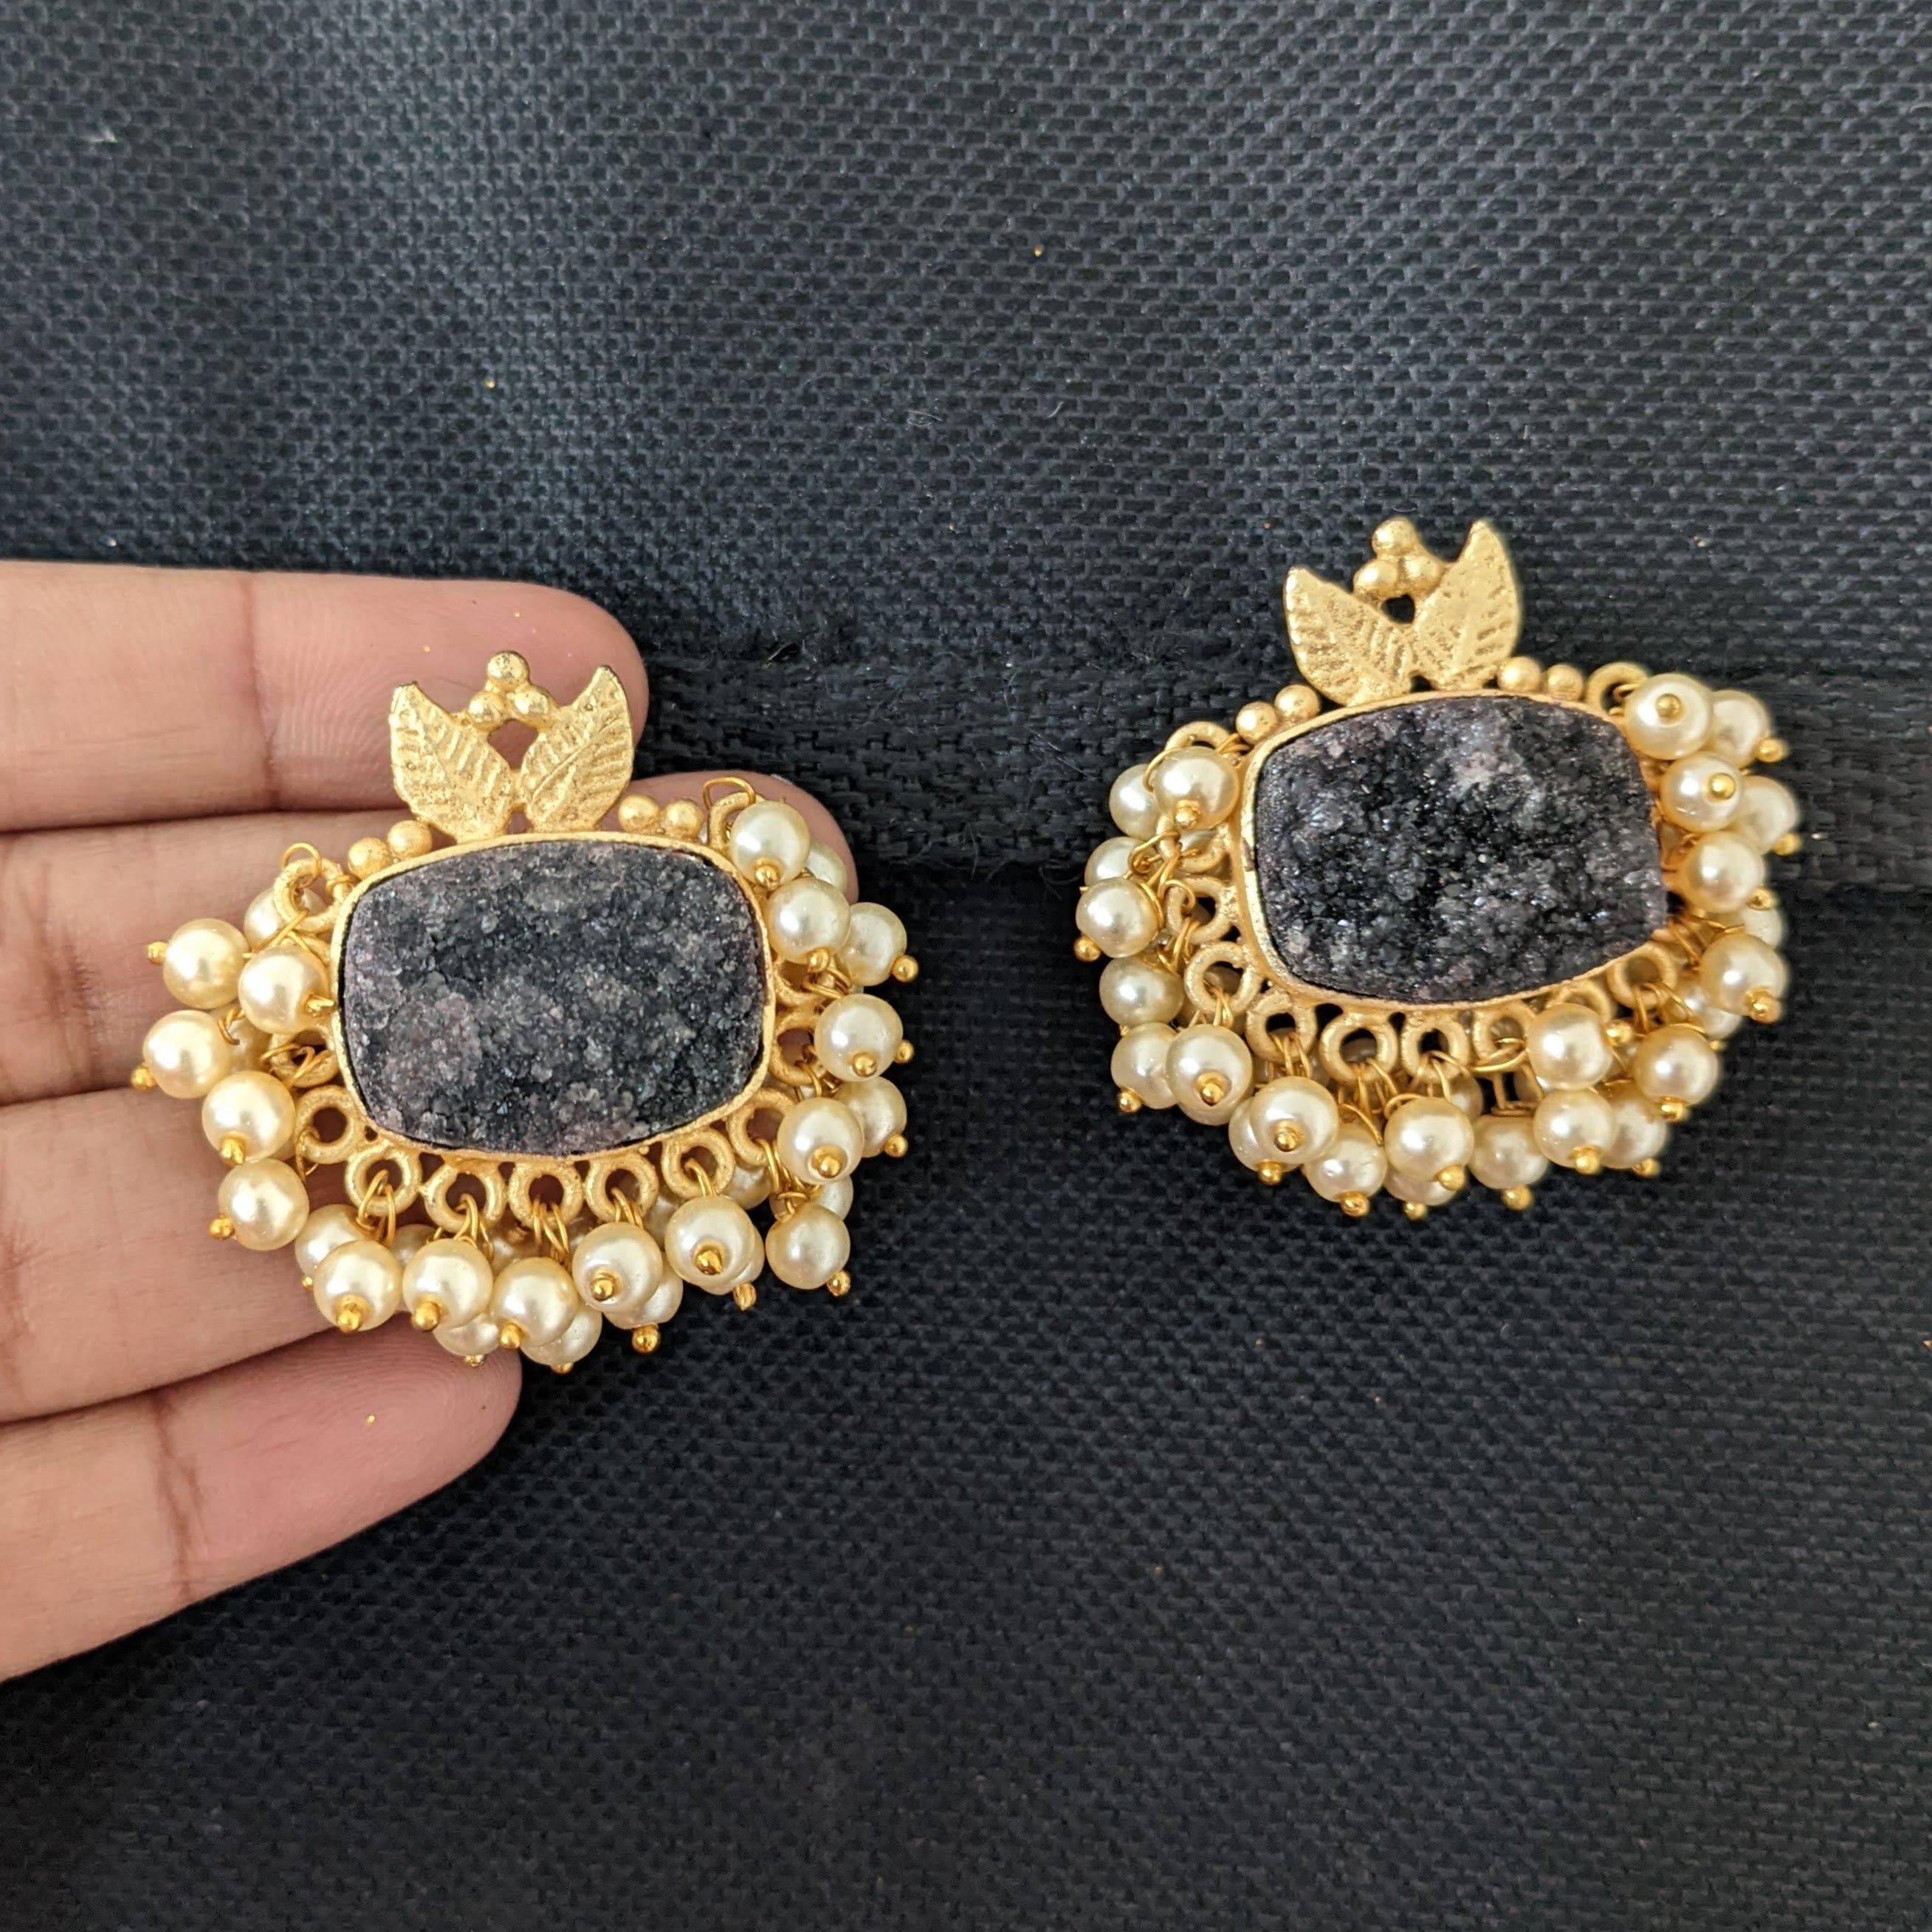 Dangling earrings with natural stone